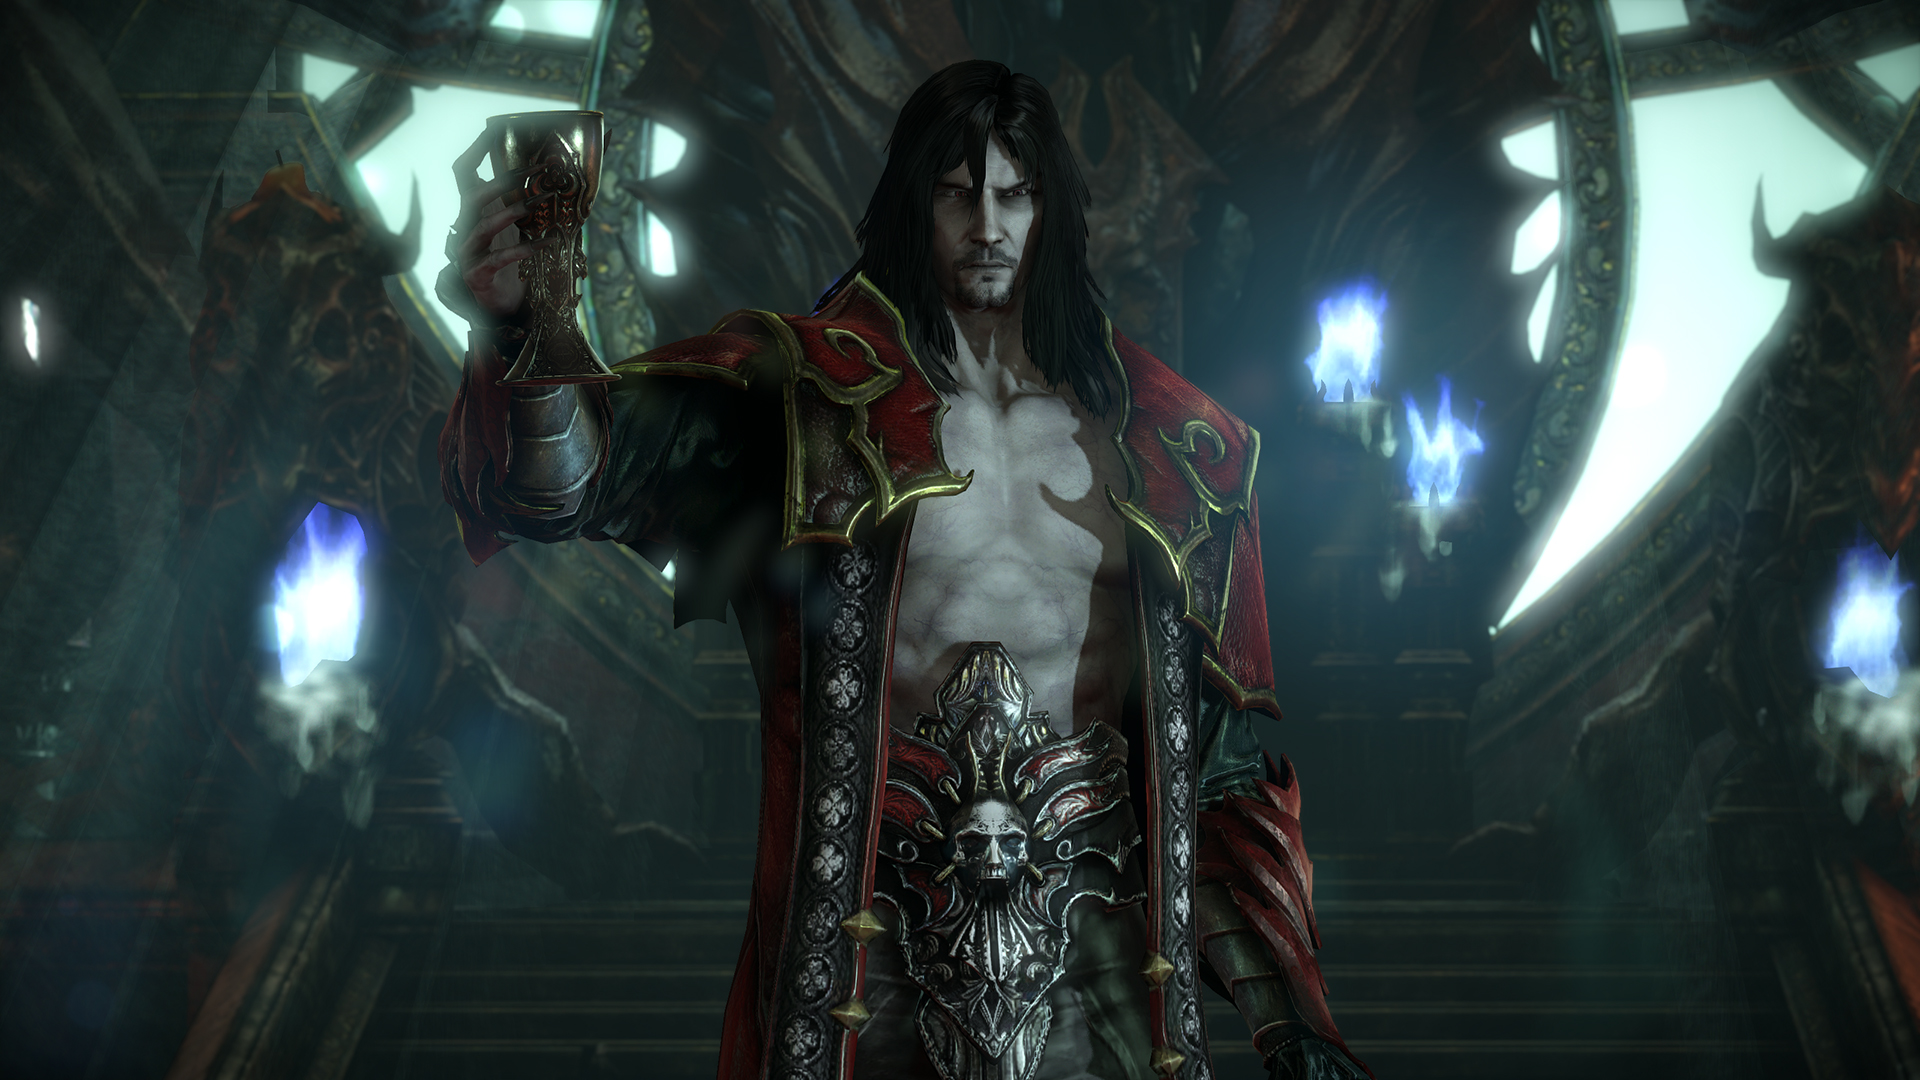 <strong><u>Be the Bad Guy in <em>Castlevania: Lords Of Shadow</em></u></strong>
</br>
</br>
Usually, the formula for a <em>Castlevania</em> game is simple: you find and kill Dracula.
</br>
</br>
But in <em>Lords of Shadow</em>, the big Drac is nowhere to be found.
</br>
</br>
Only in the post-credits scene do we see that your character Gabriel has become Dracula and this was all just a prologue for the series’ greatest villain.